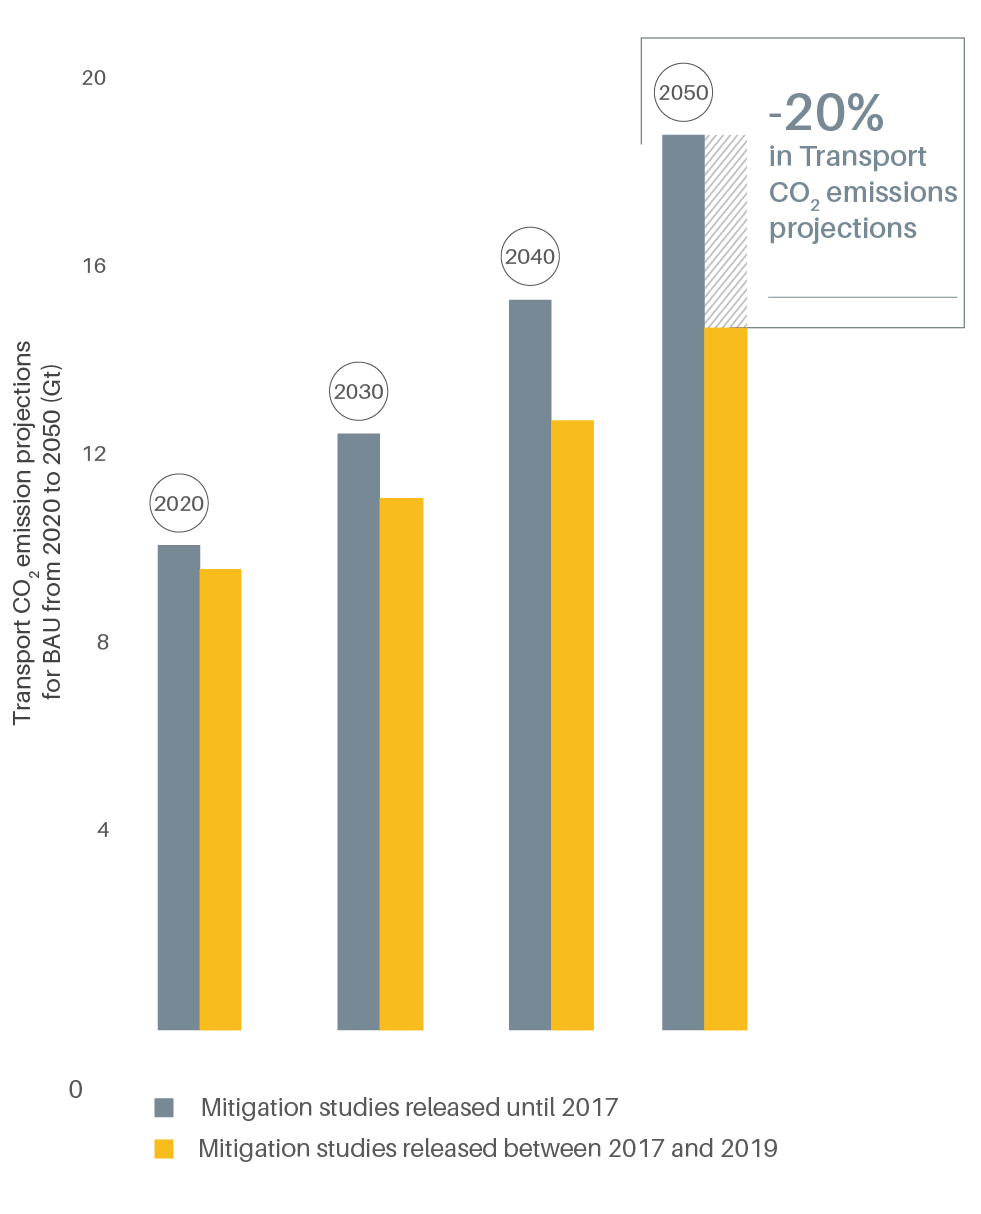 Comparison of business-as-usual projections for transport emissions, 2017 and 2019 studies